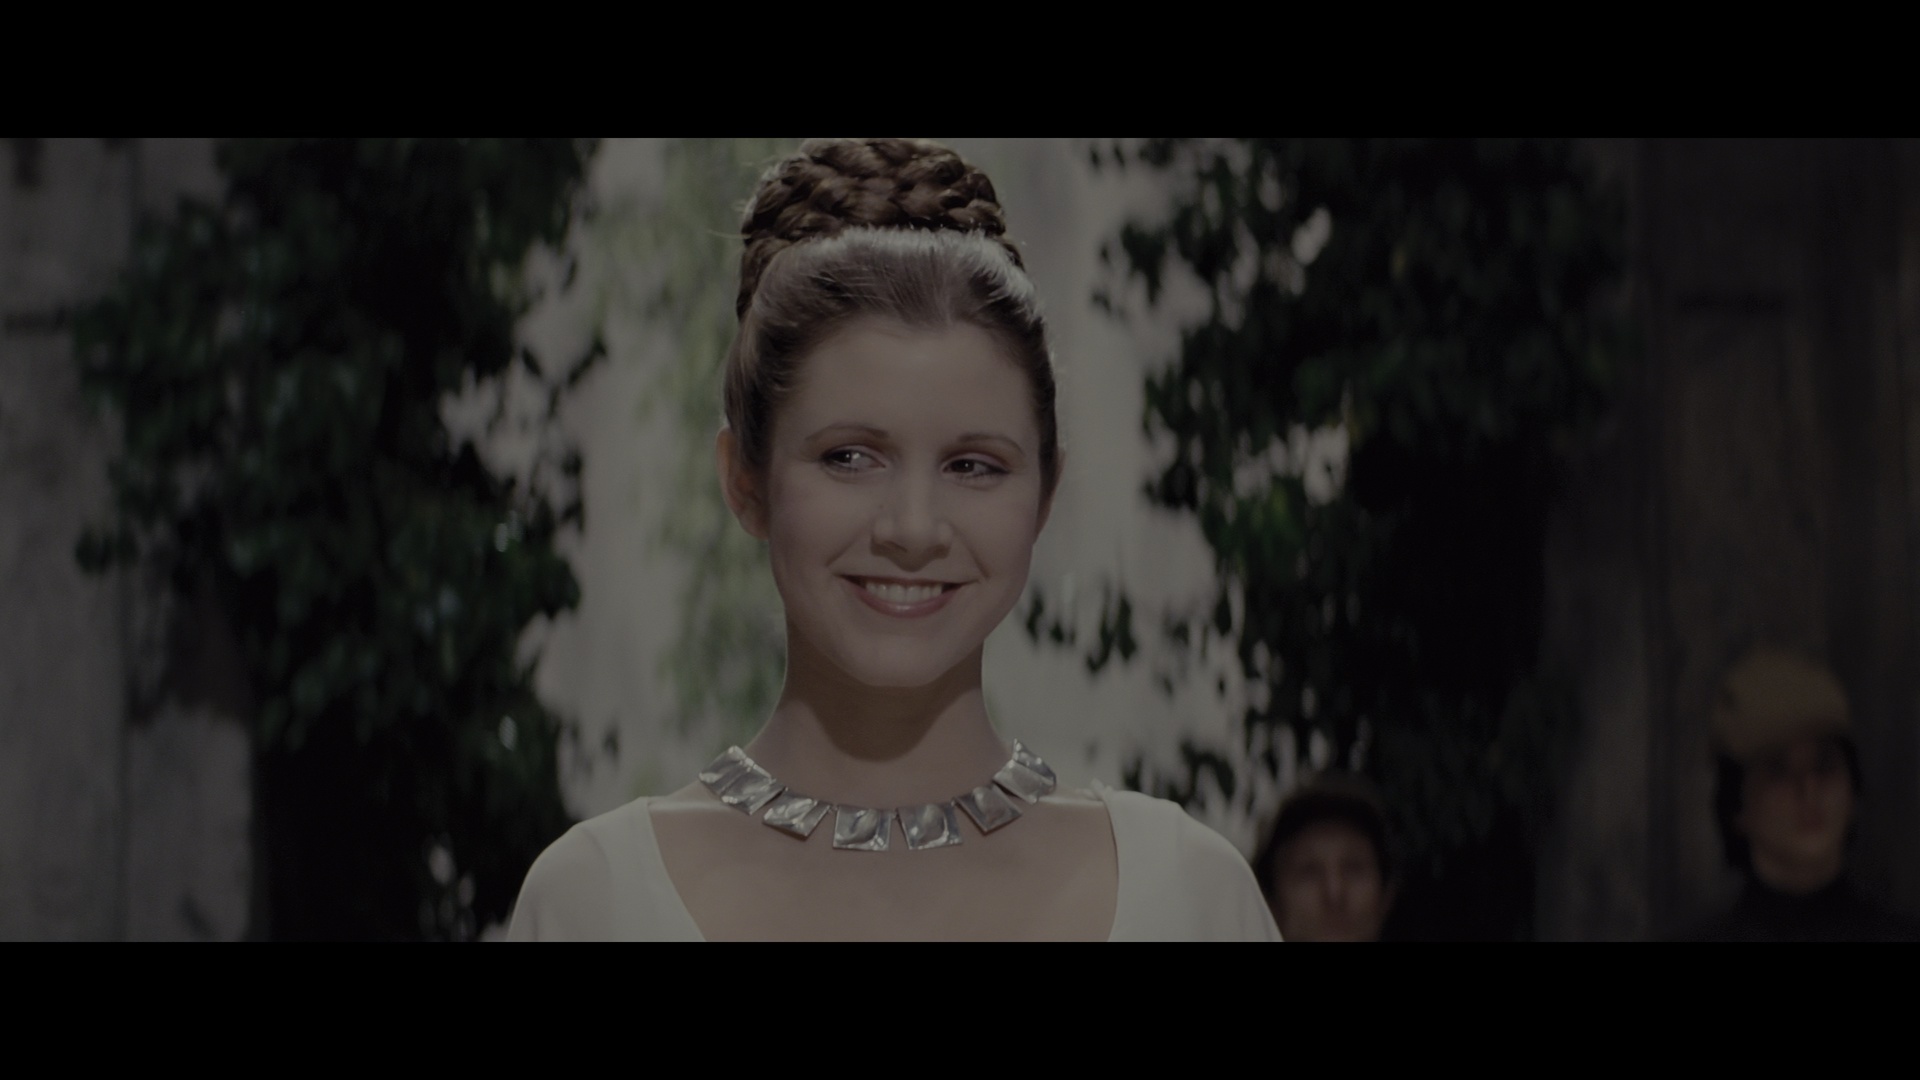 STAR WARS: A NEW HOPE (1977) - Princess Leia's (Carrie Fisher) Screen-Matched Ceremonial Dress - Image 31 of 39